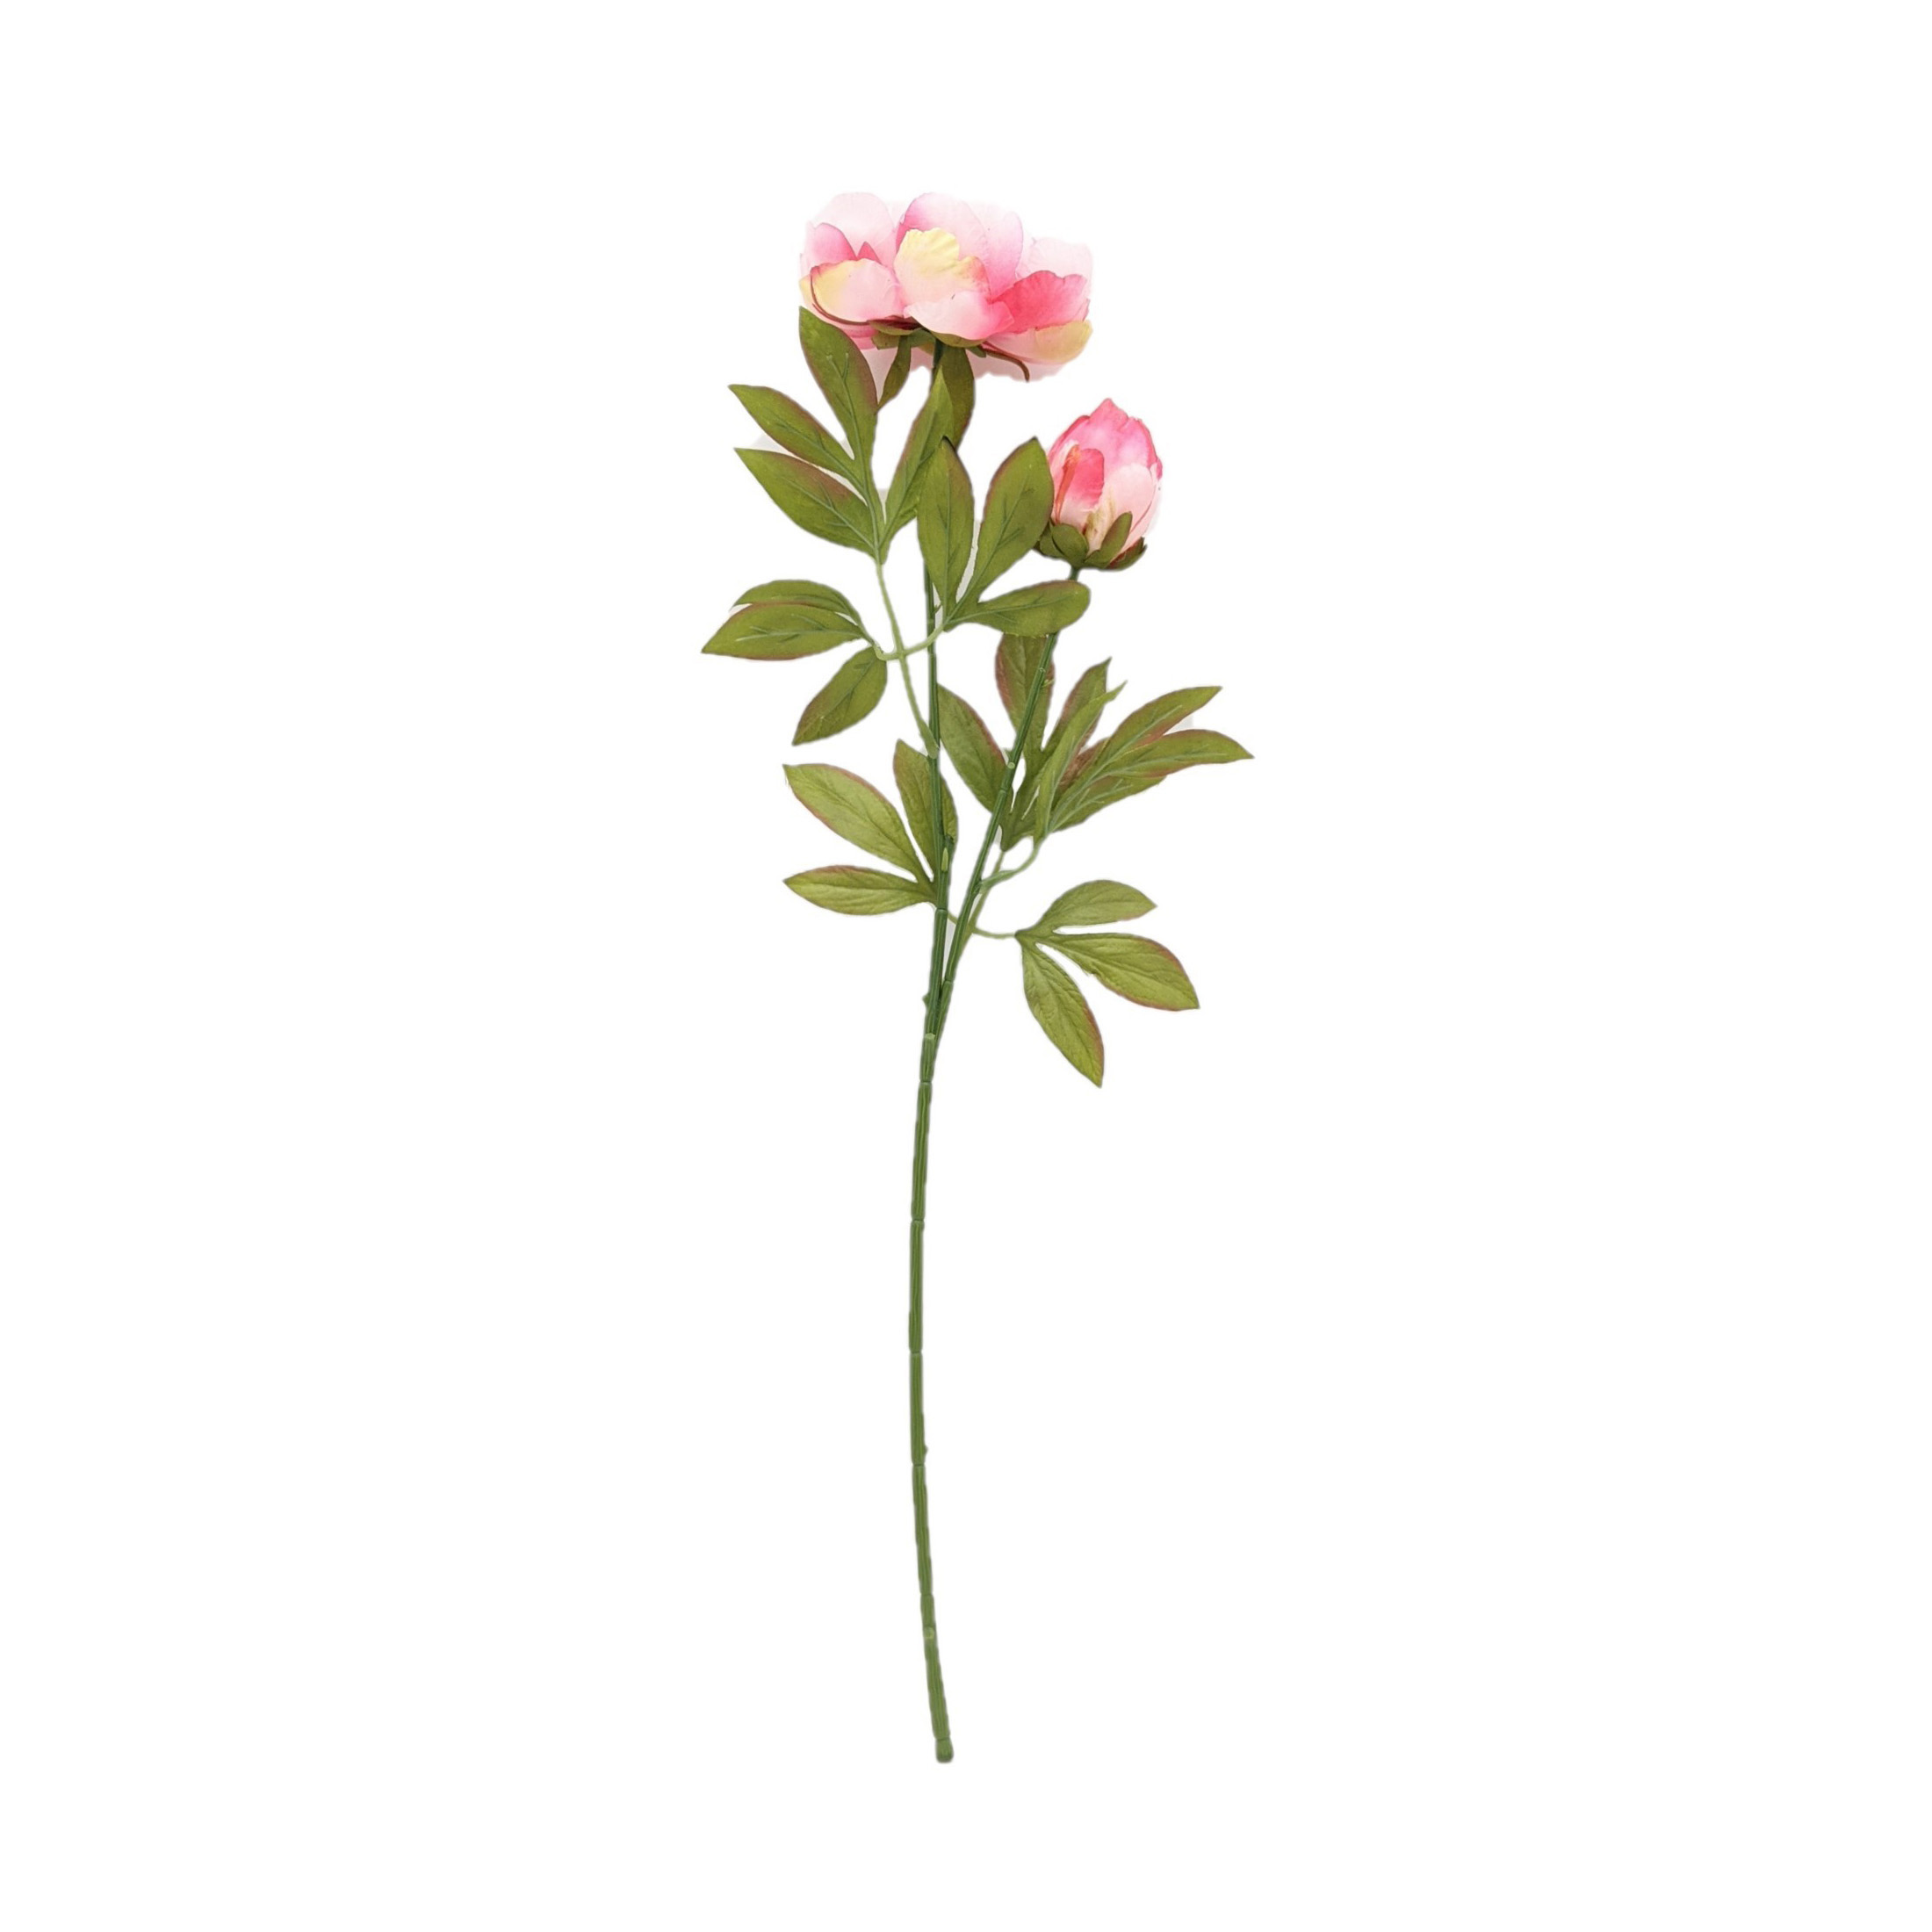 Mainstays 27" Tall Artificial Pink Peony Flower Indoor Stem - image 1 of 5